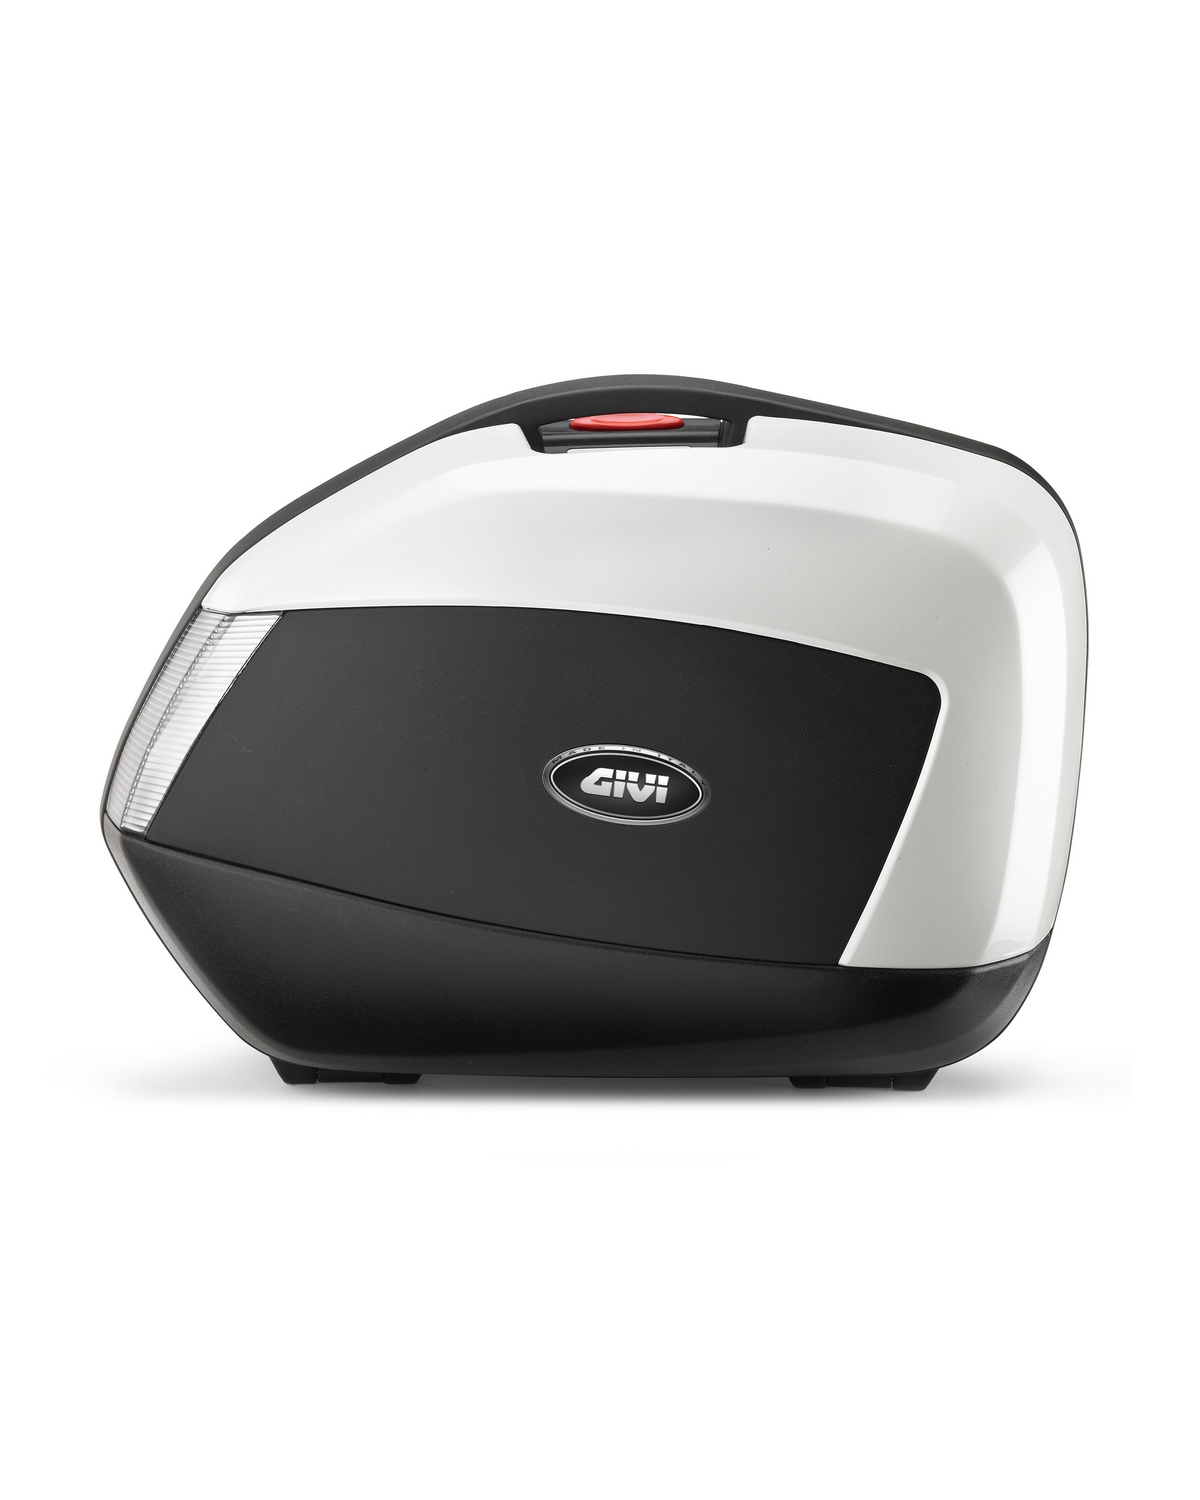 Support Givi Chassis pour support GPS - Adaptateur et chargeur